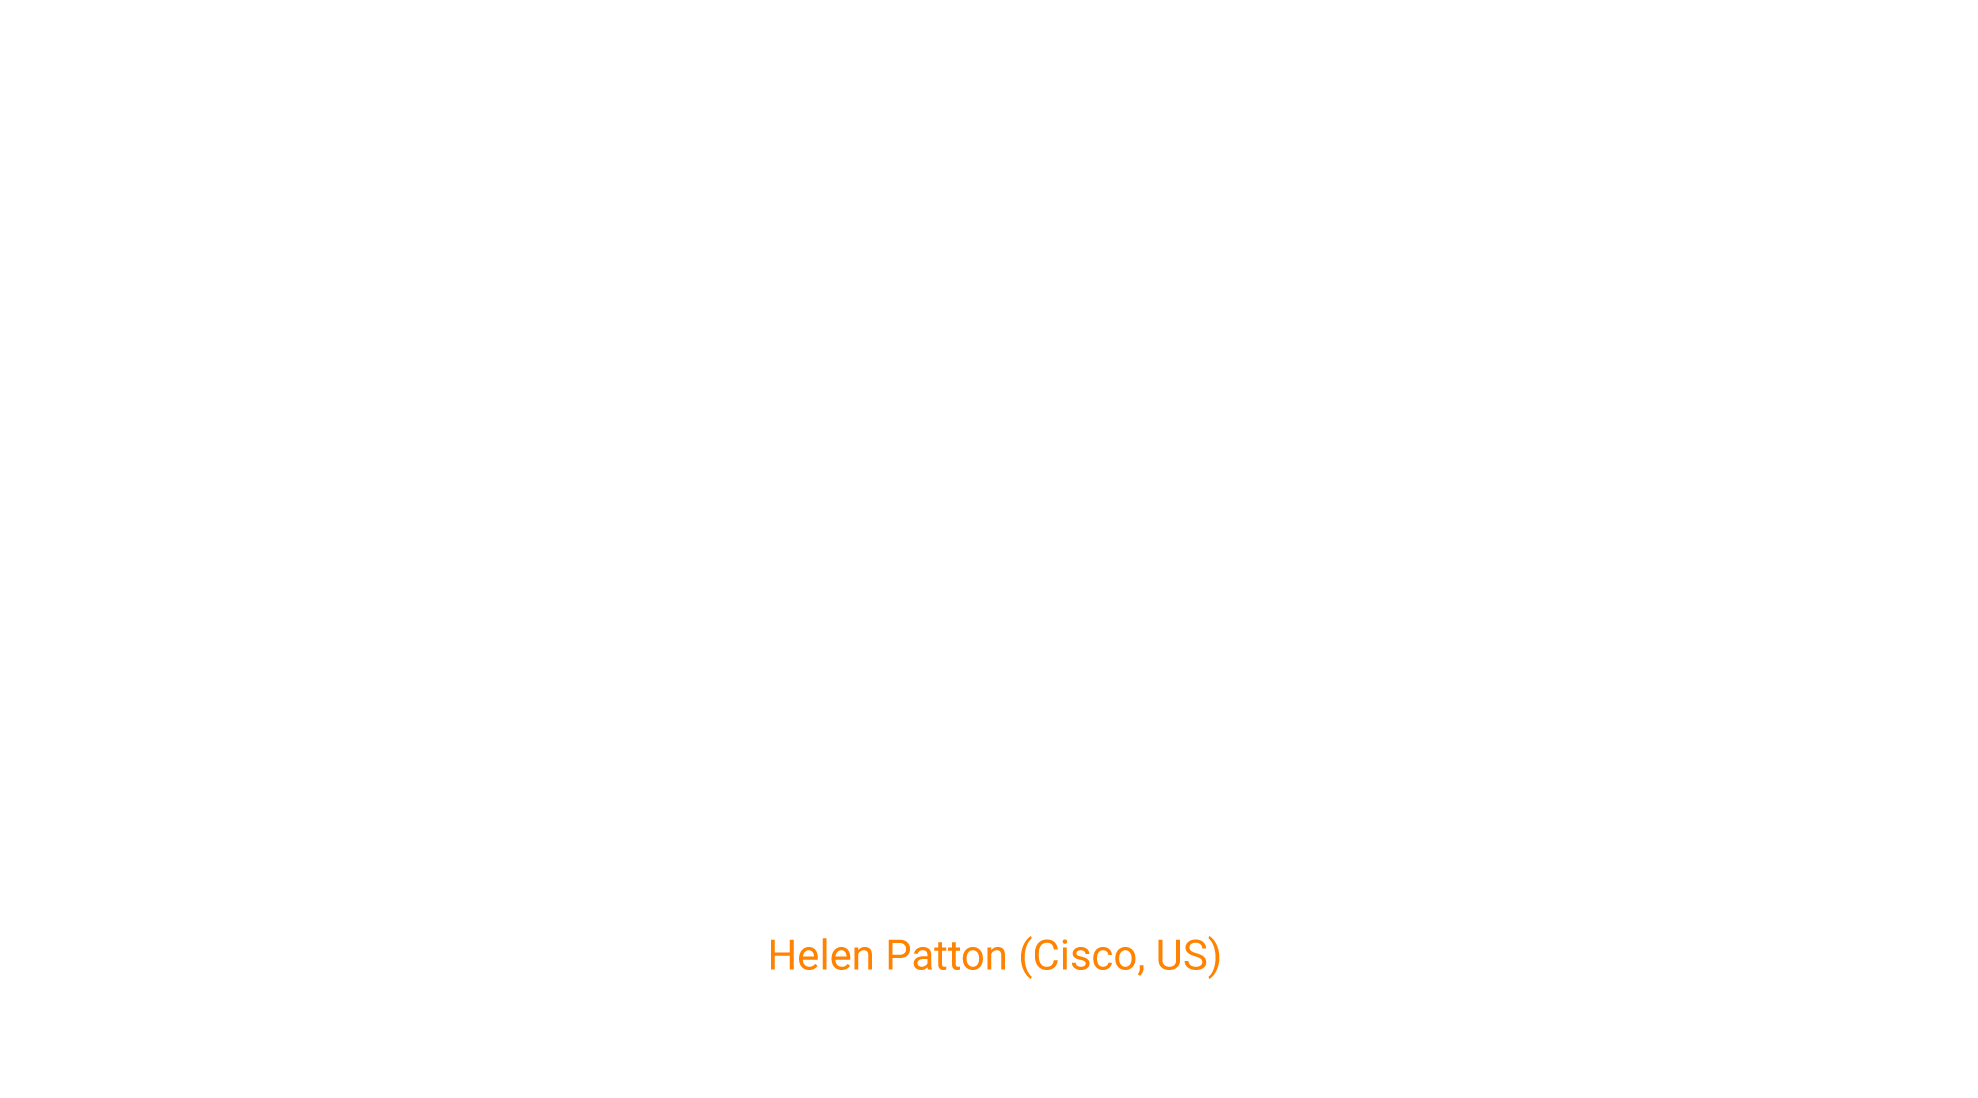 How to Talk to a Board so the Board Will Talk Back